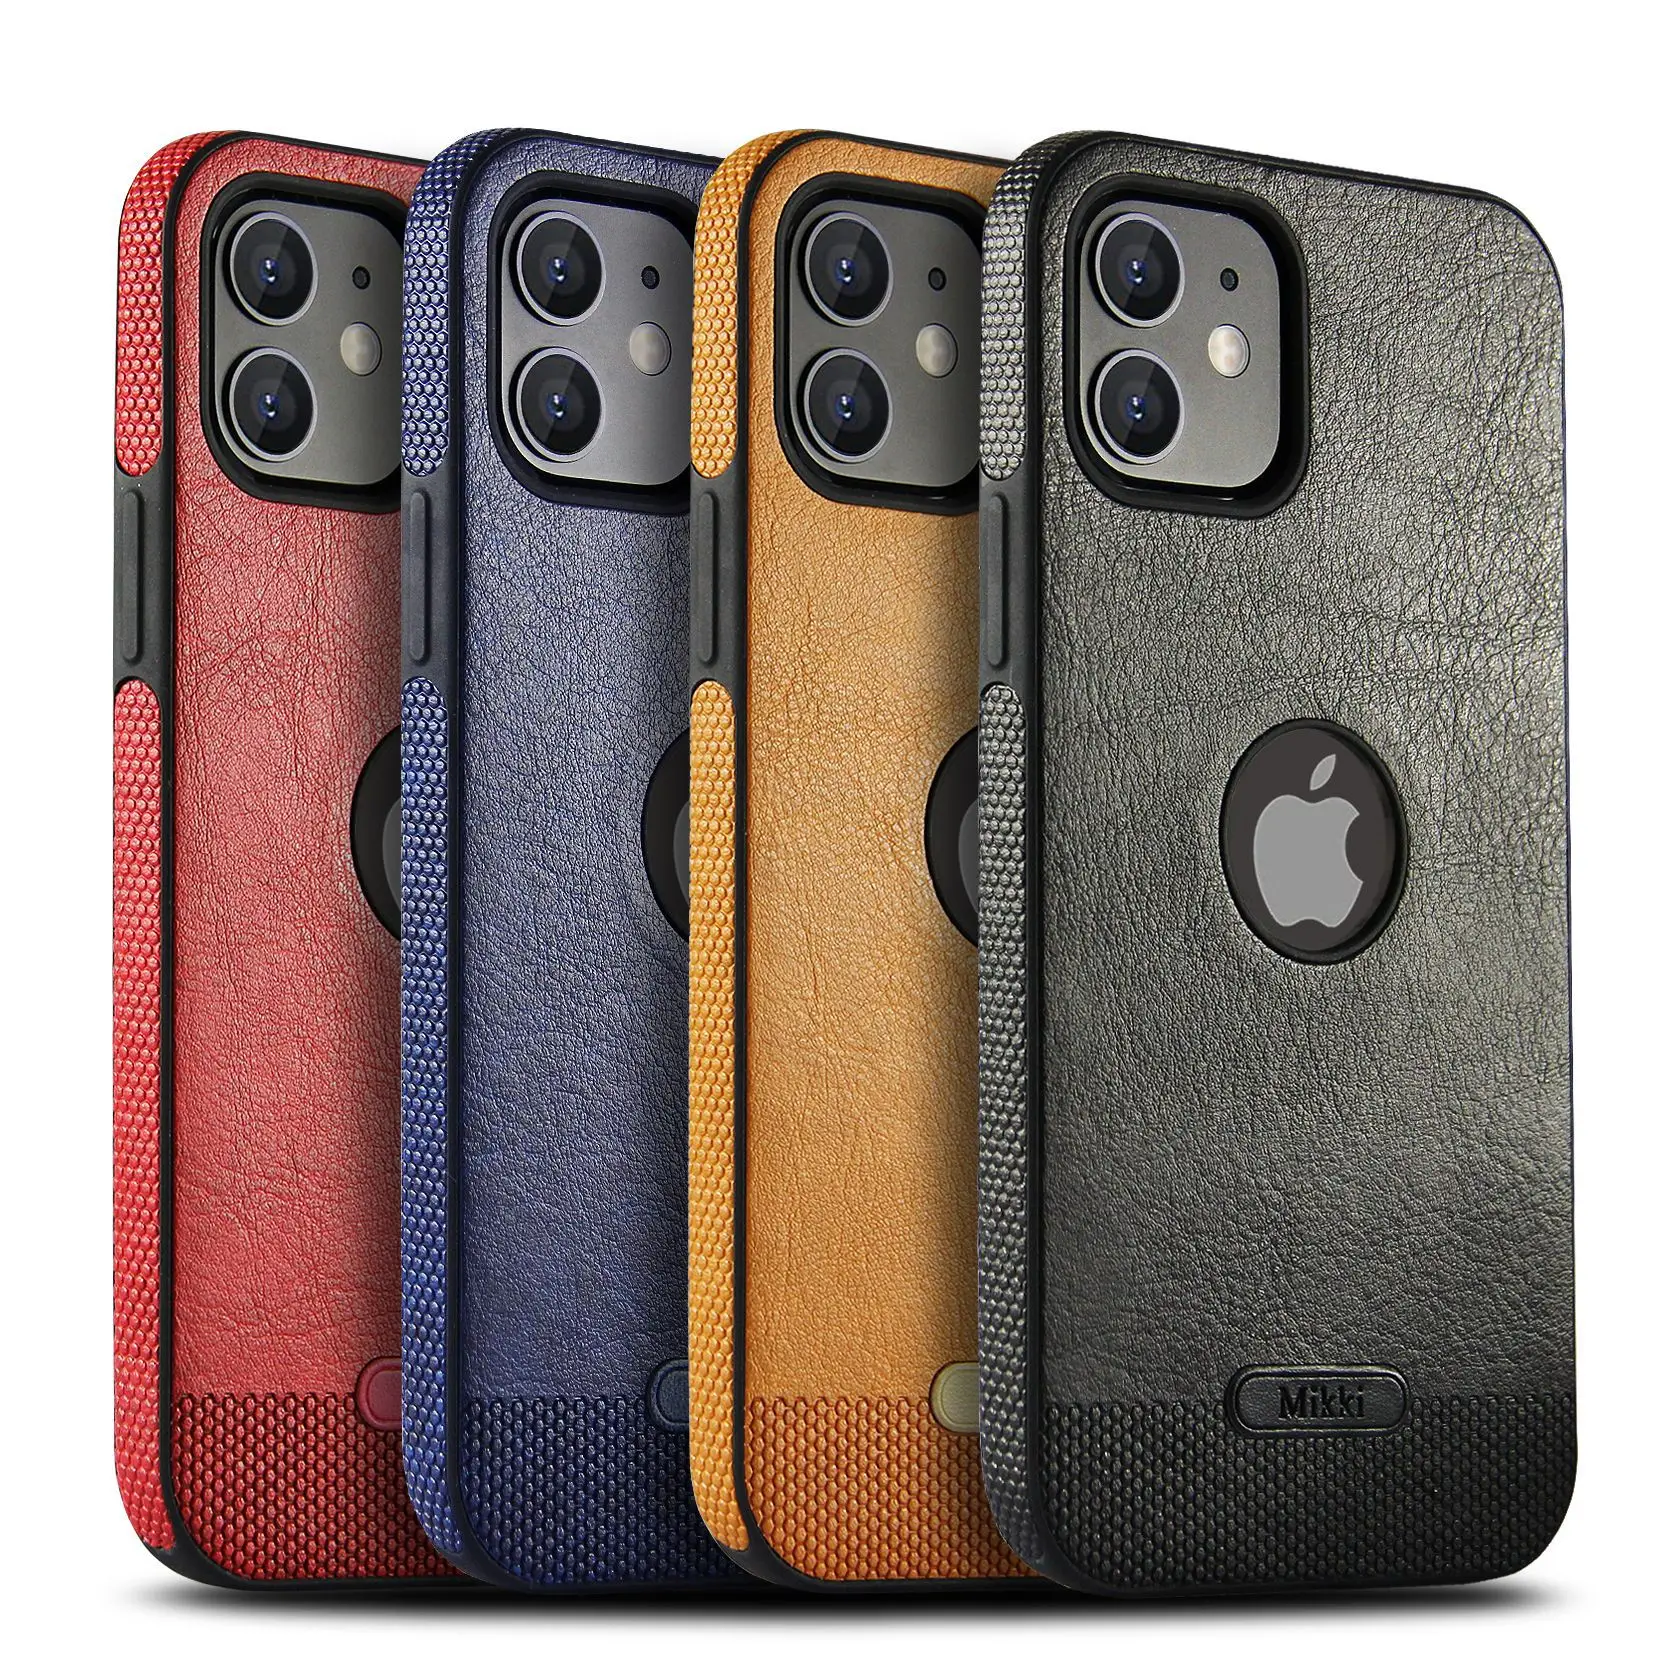 Business Stitching PU Leather Soft Slim Case Protective Mobile Phone Cover Case For Iphone 12 Pro iPhone 13 11 (1600152586319)